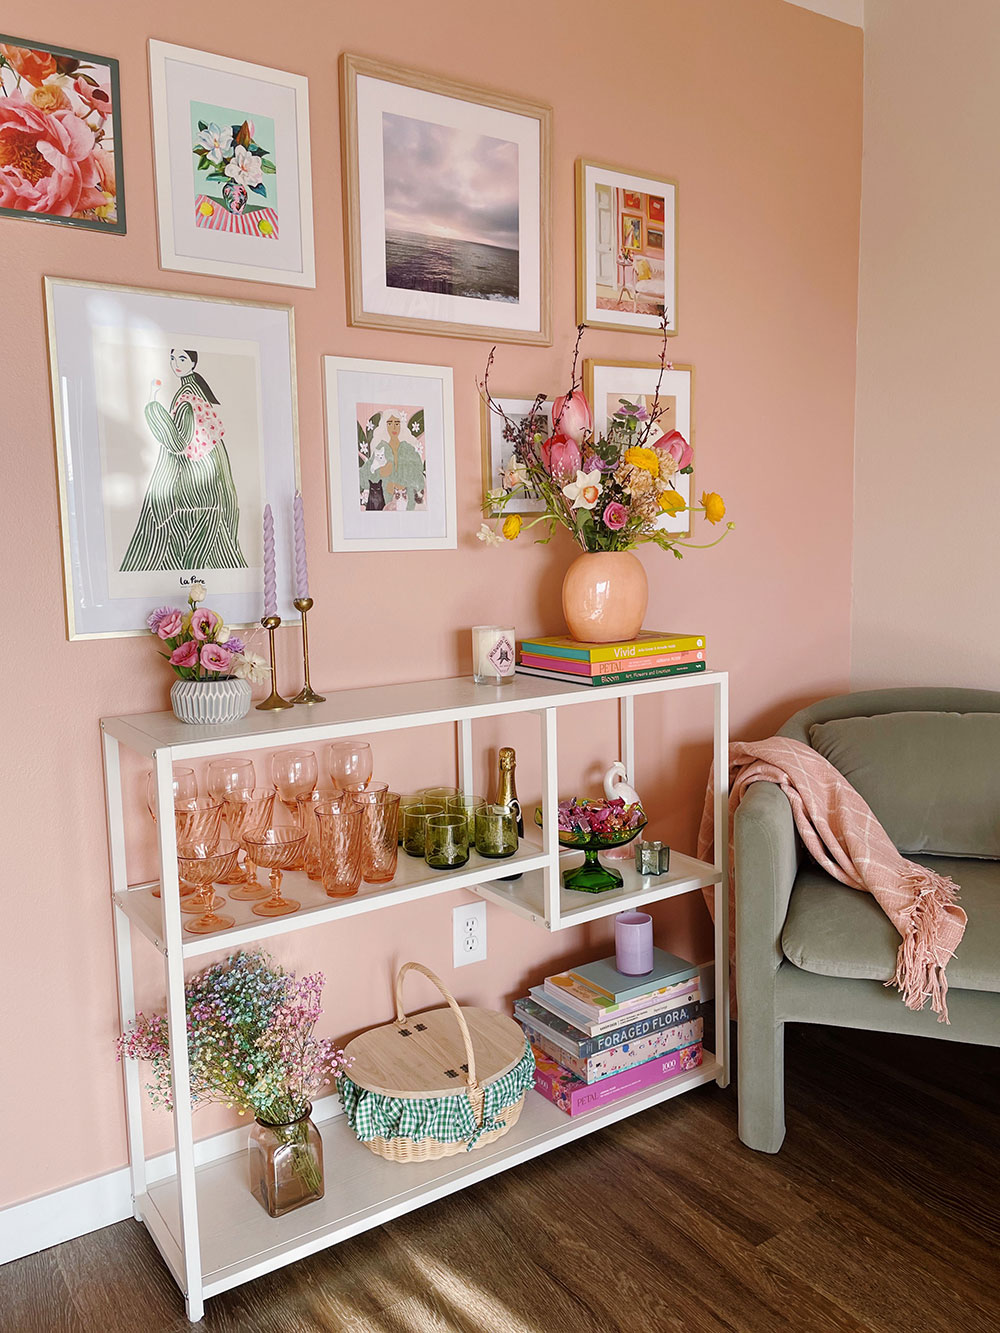 Clare paint 'Meet Cute' with console table and gallery wall ideas